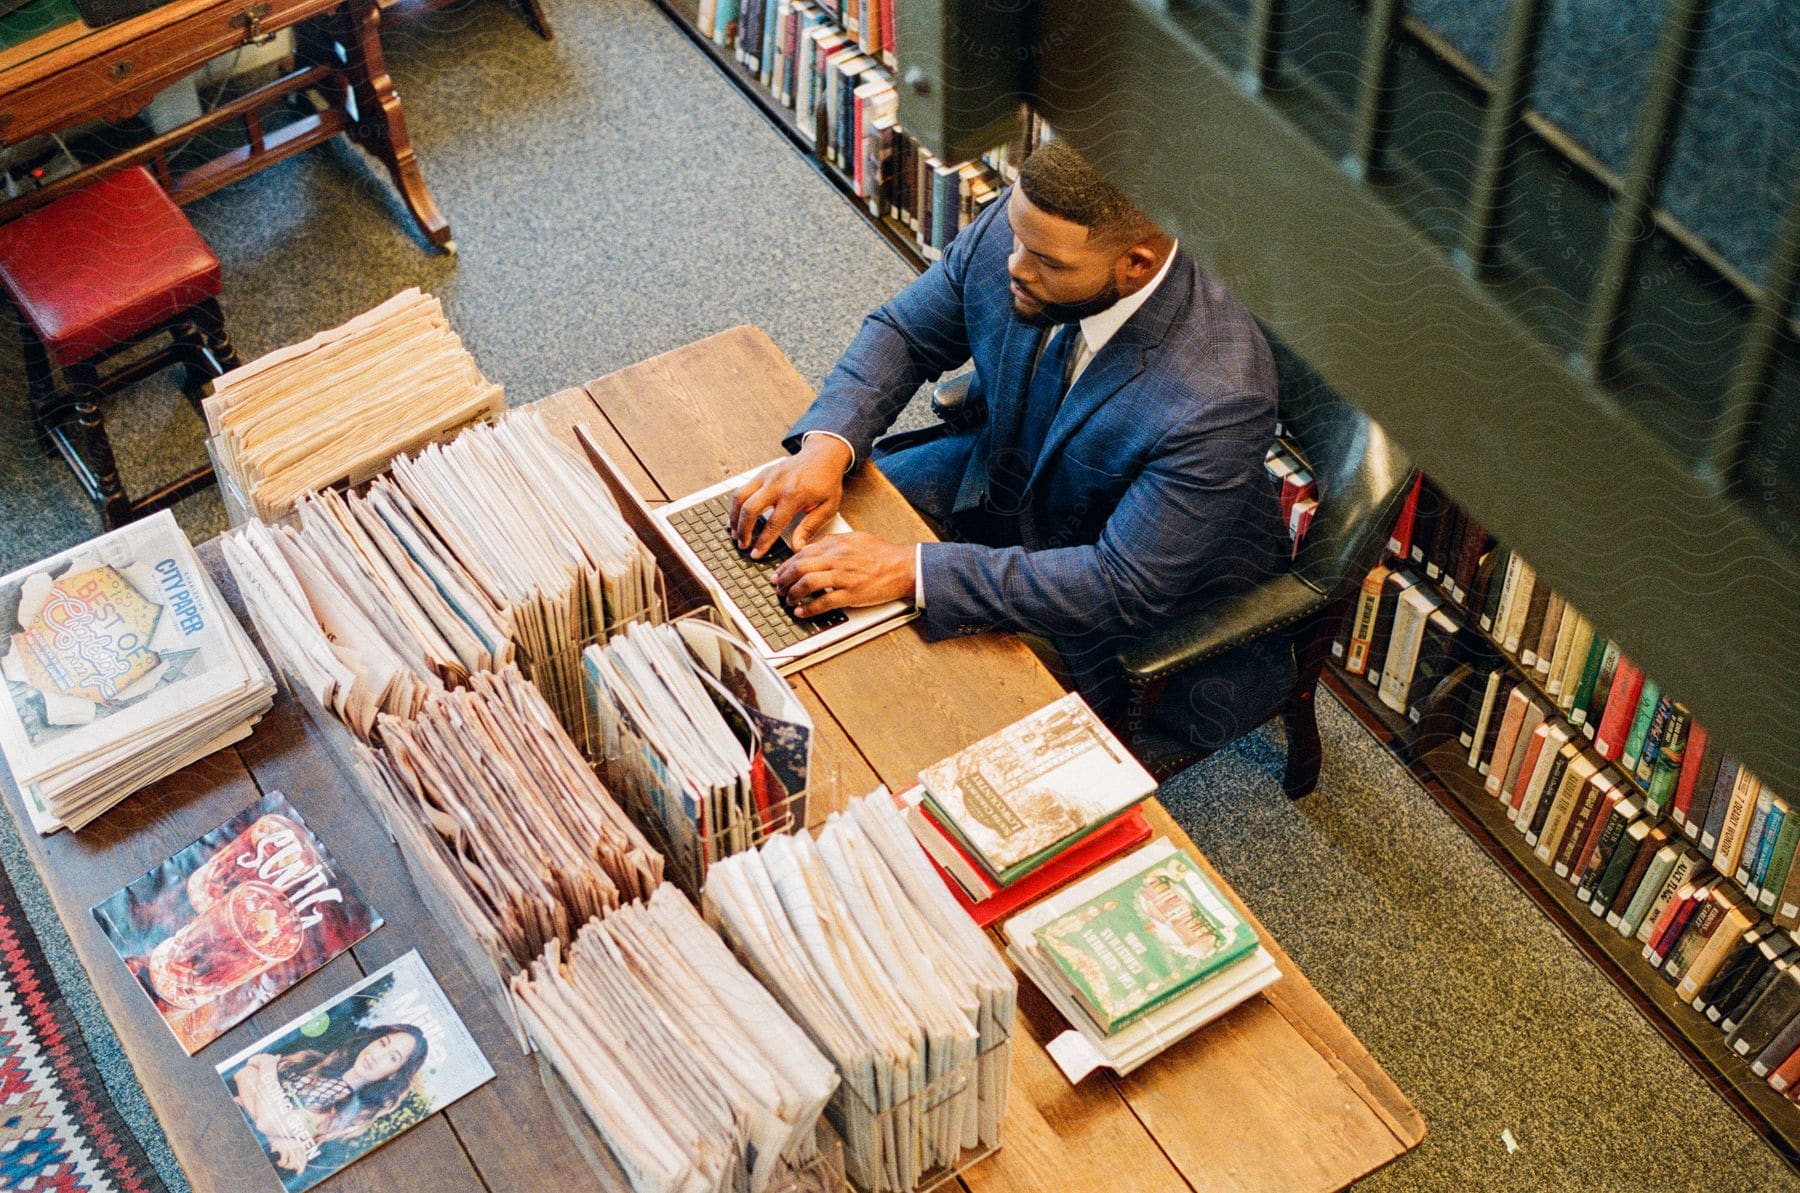 Man in a blue suit sitting at a desk typing on his laptop in a library, surrounded by stacks of magazines and books.